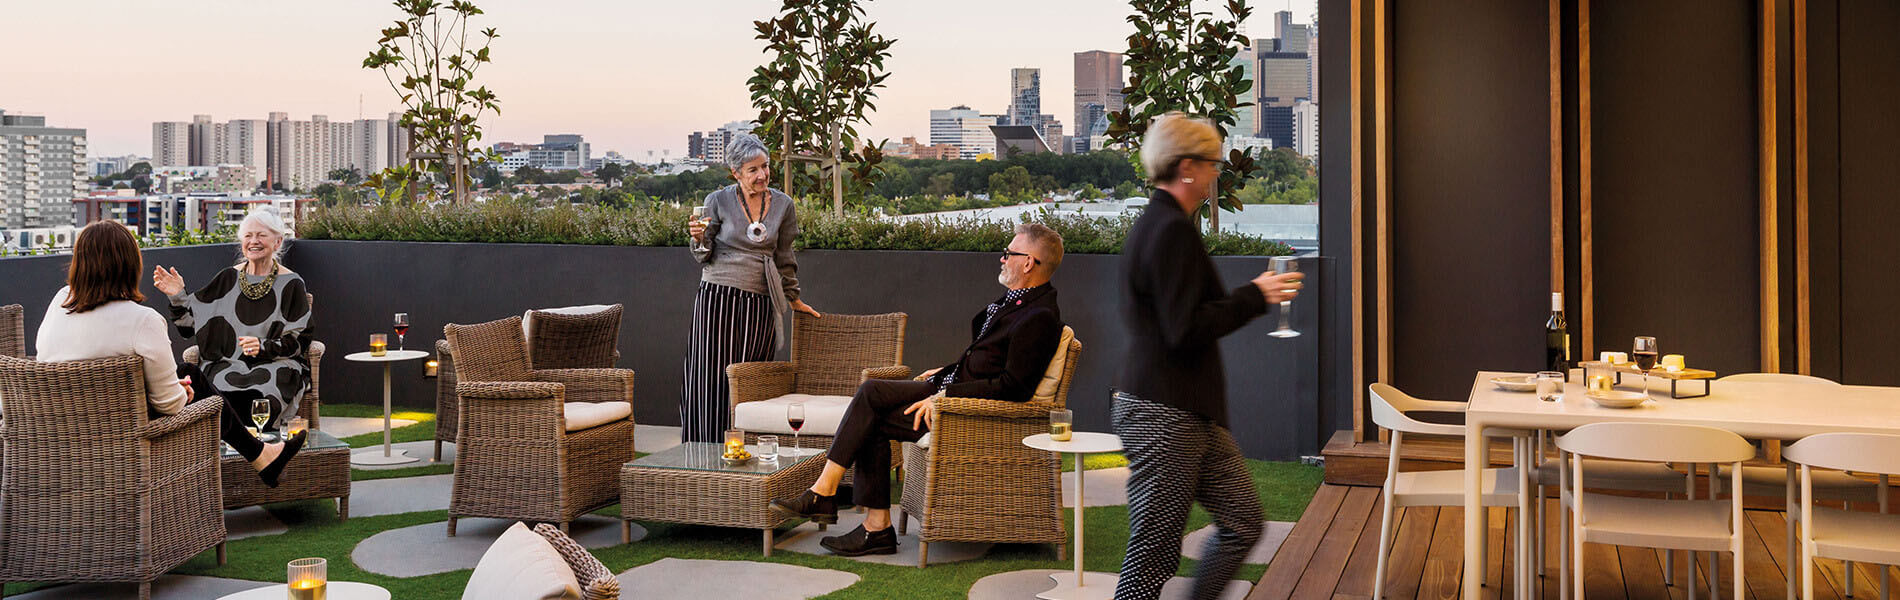 Drummond Place outdoor terrace with a view of the skyline in the city in the background. Residents enjoying a drink on the terrace.